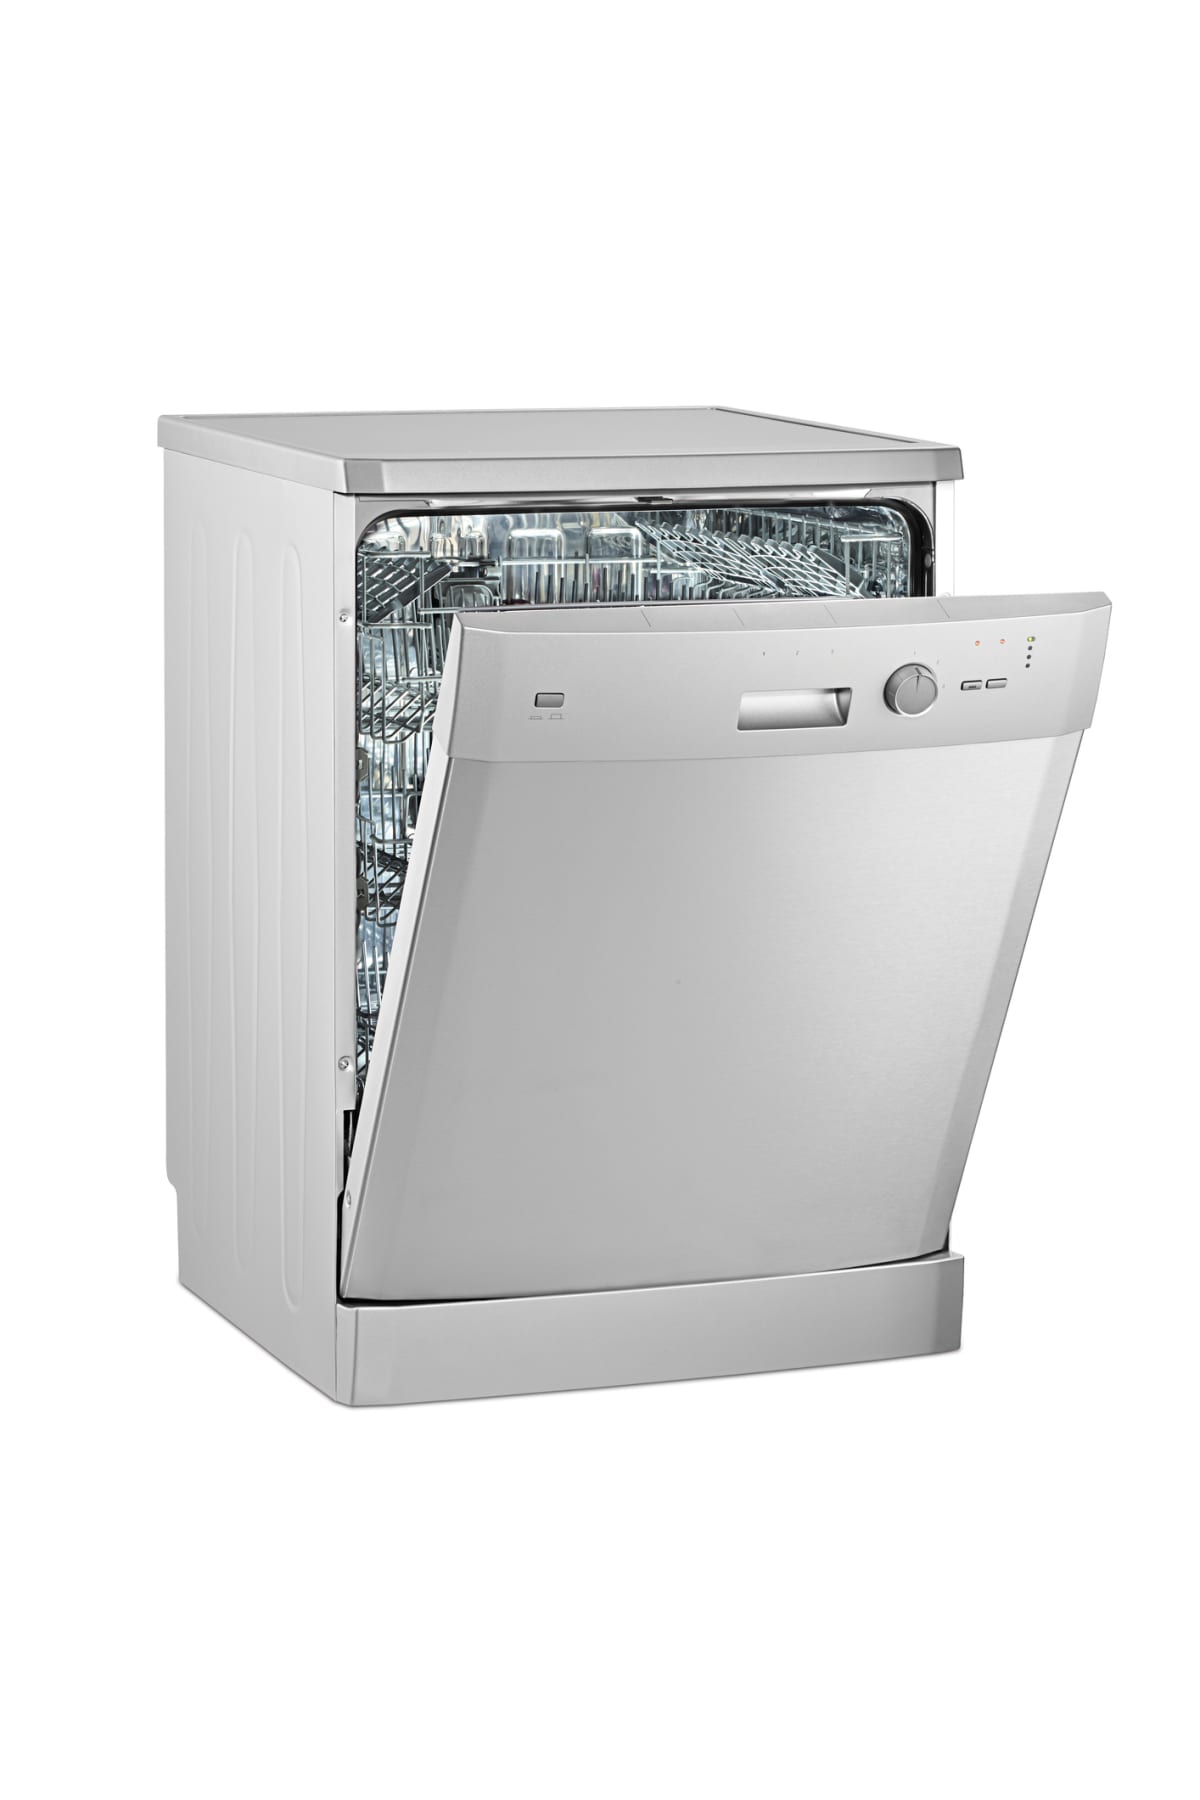 Modern, chic dishwasher with clipping path on white background